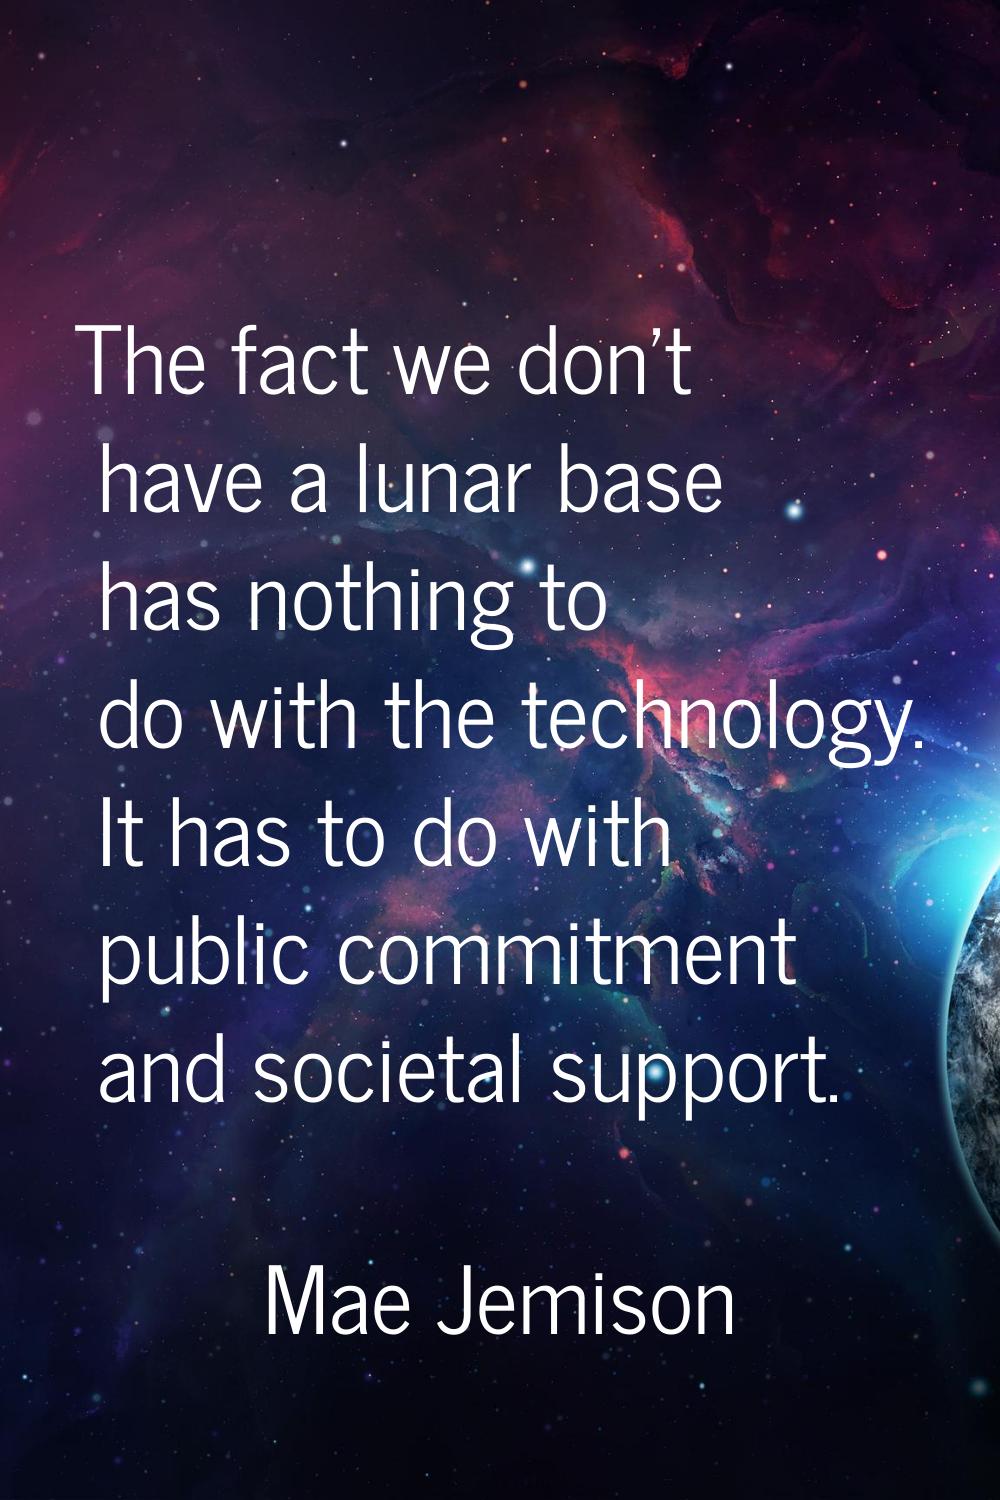 The fact we don't have a lunar base has nothing to do with the technology. It has to do with public